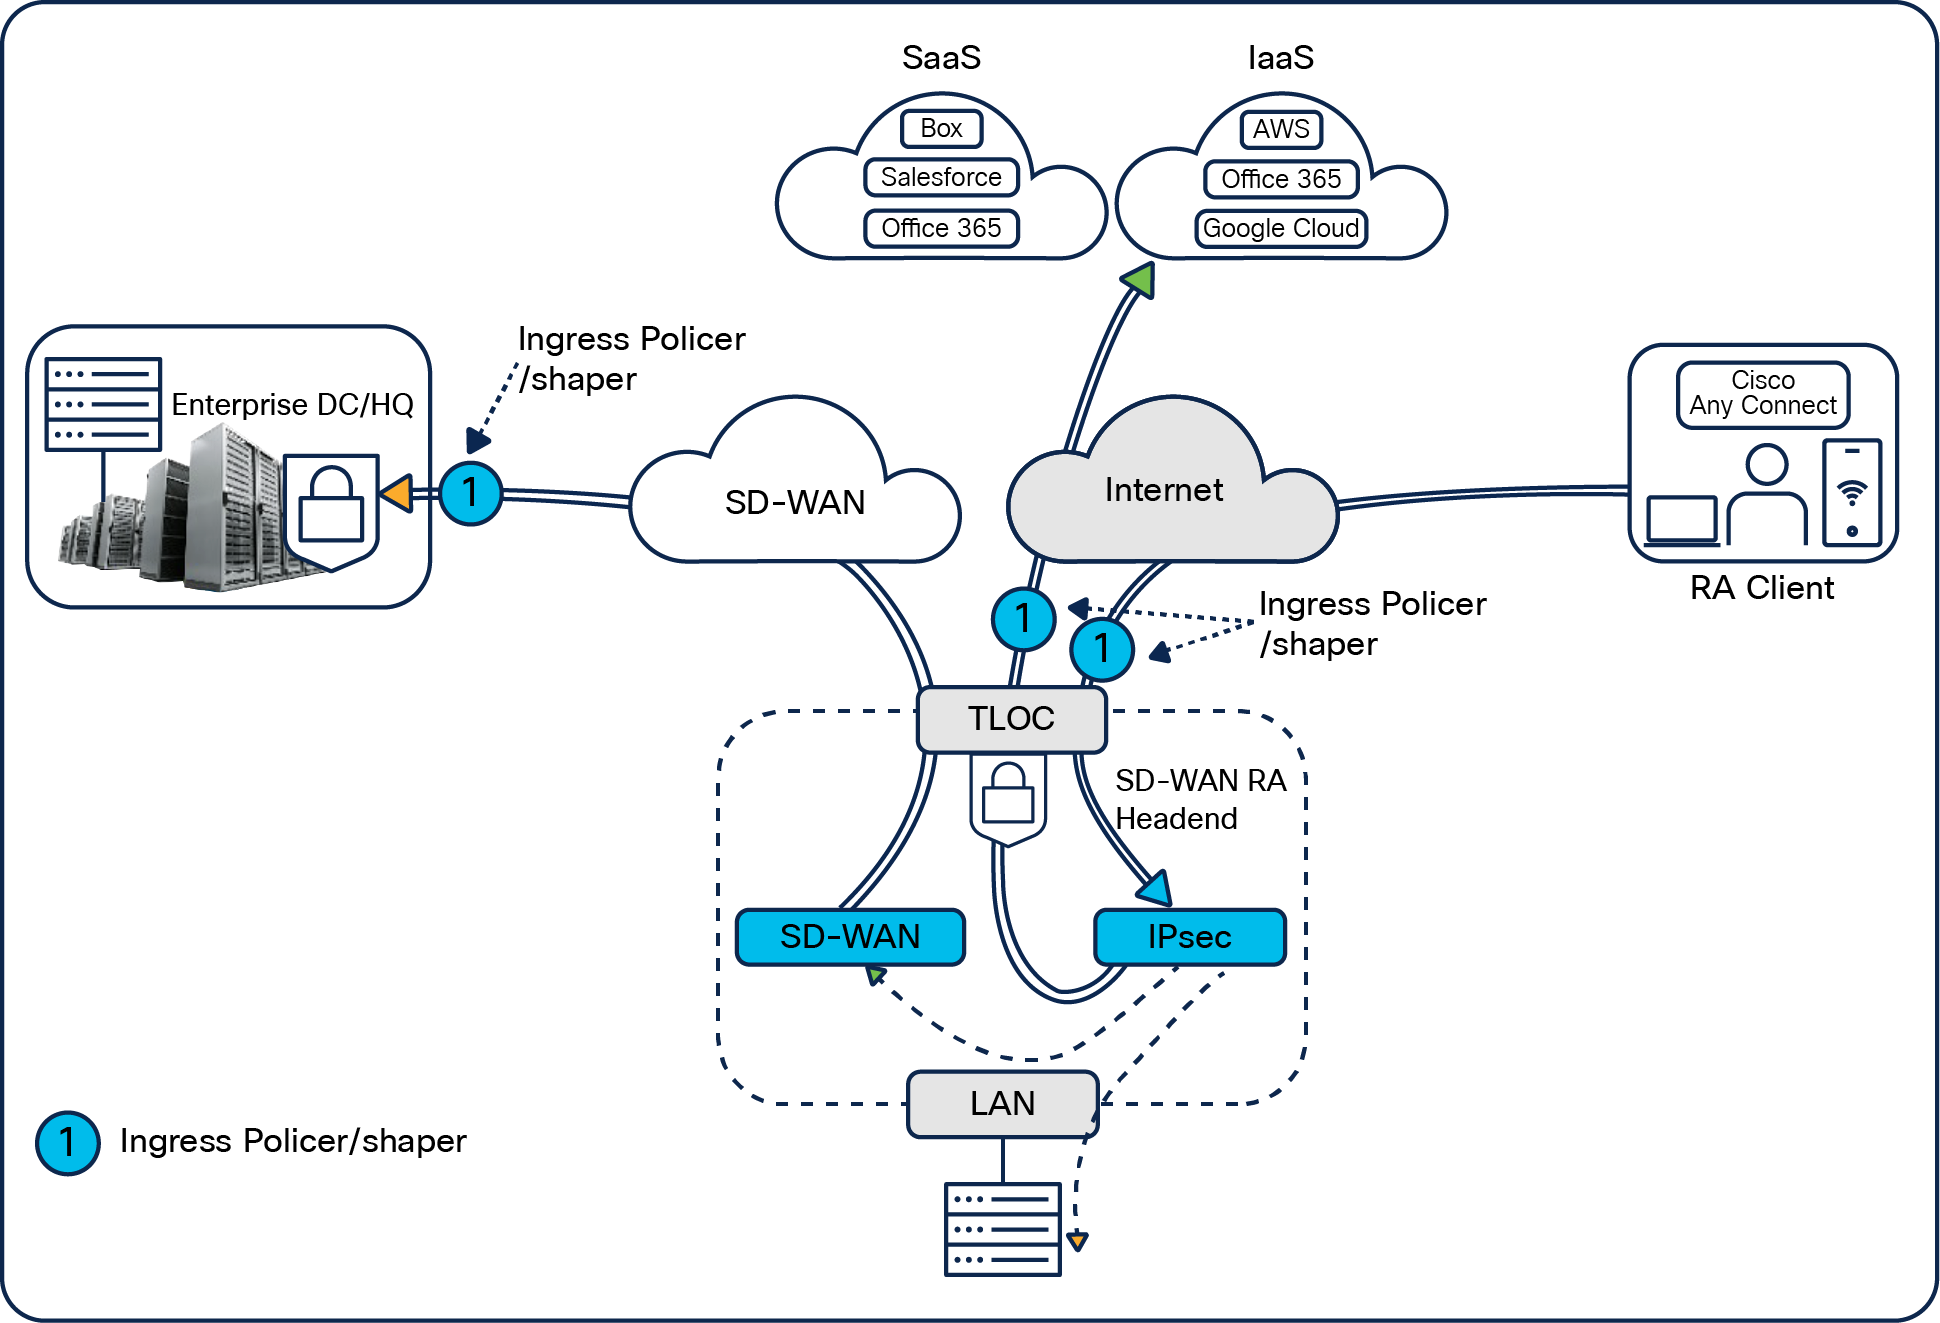 Remote-access client upstream traffic